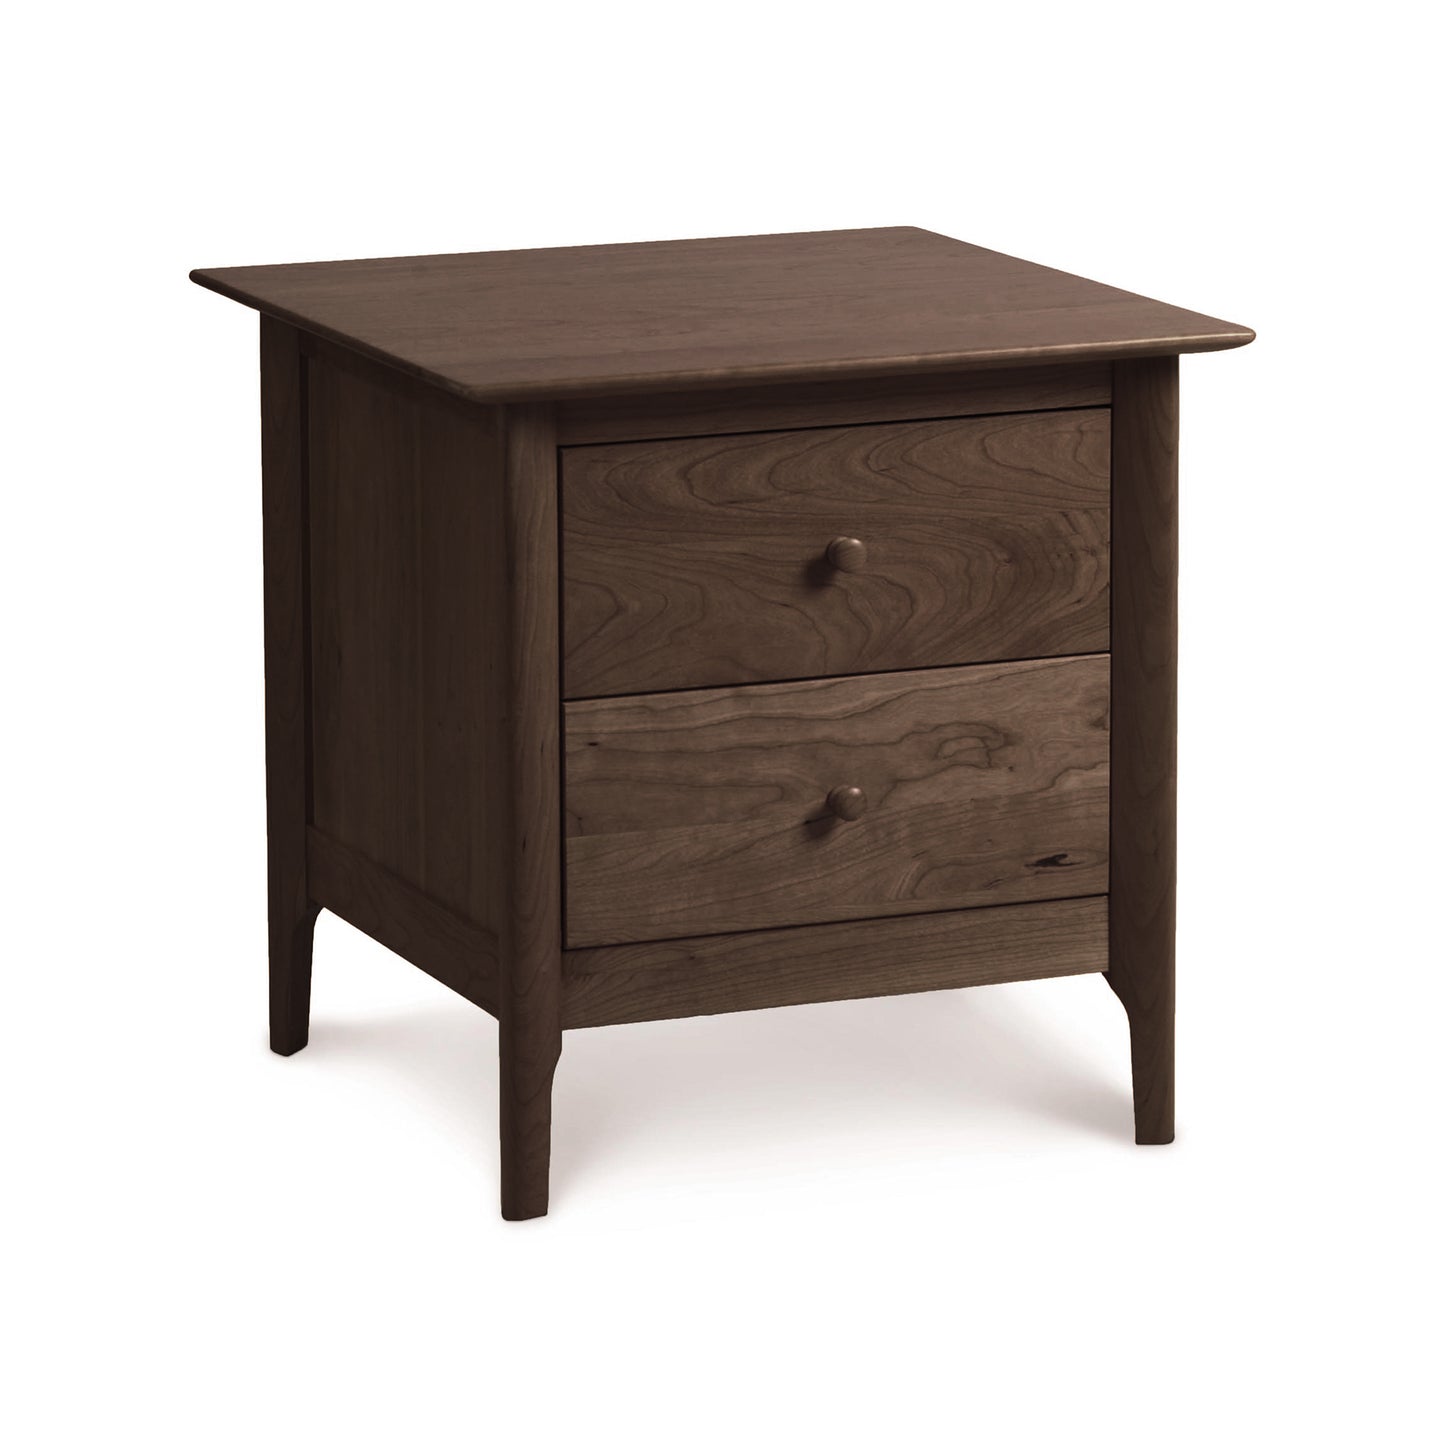 An eco-friendly hardwood Sarah 2-Drawer Nightstand by Copeland Furniture isolated on a white background.